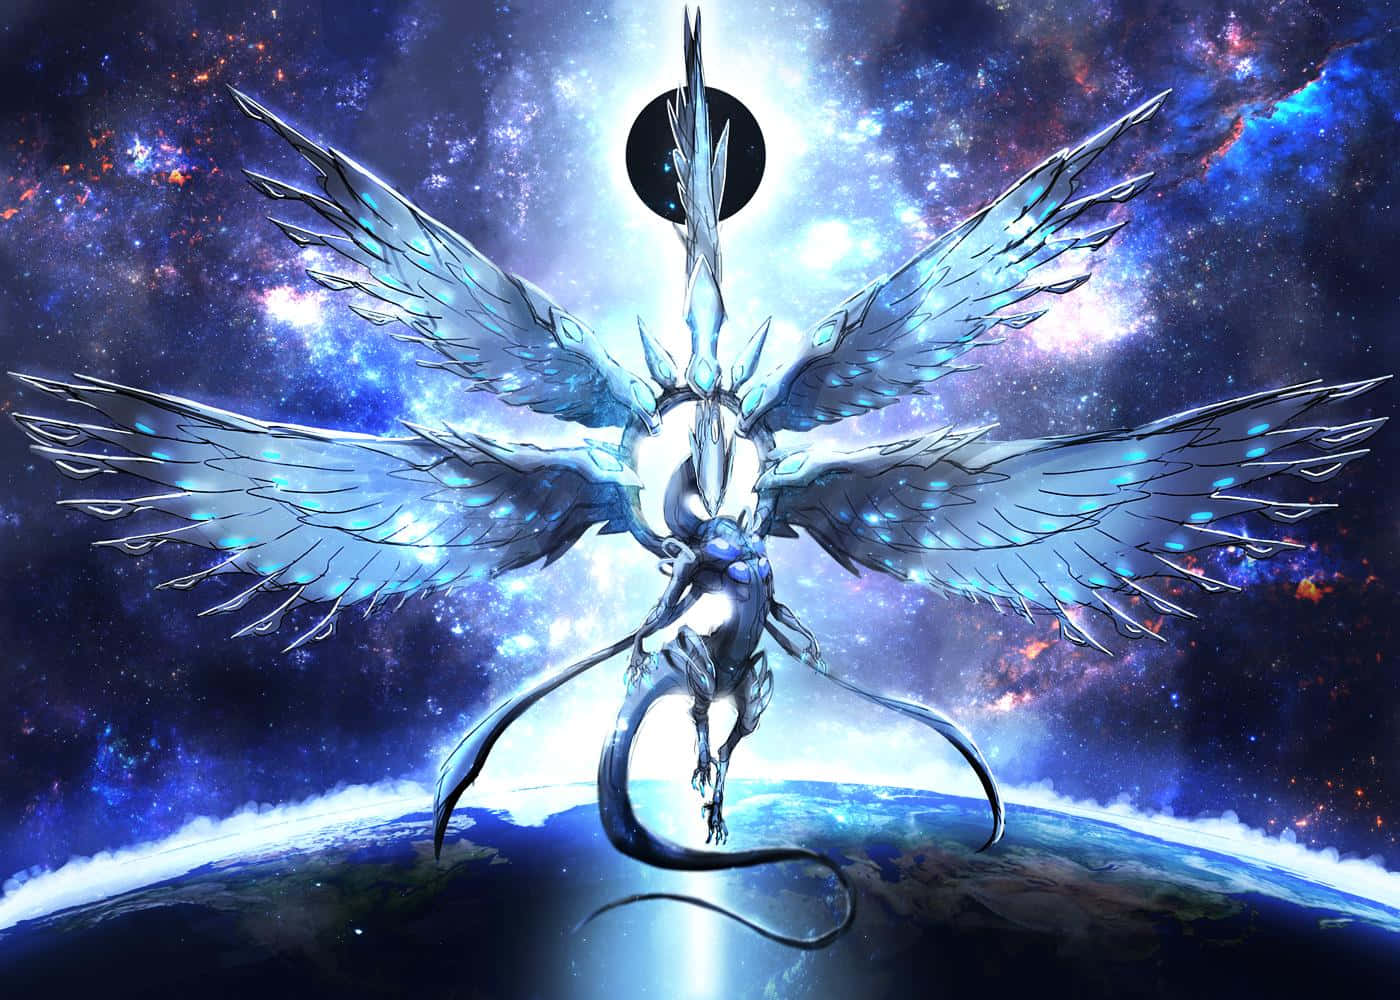 A Woman With Wings Is Holding A Sword In Space Wallpaper